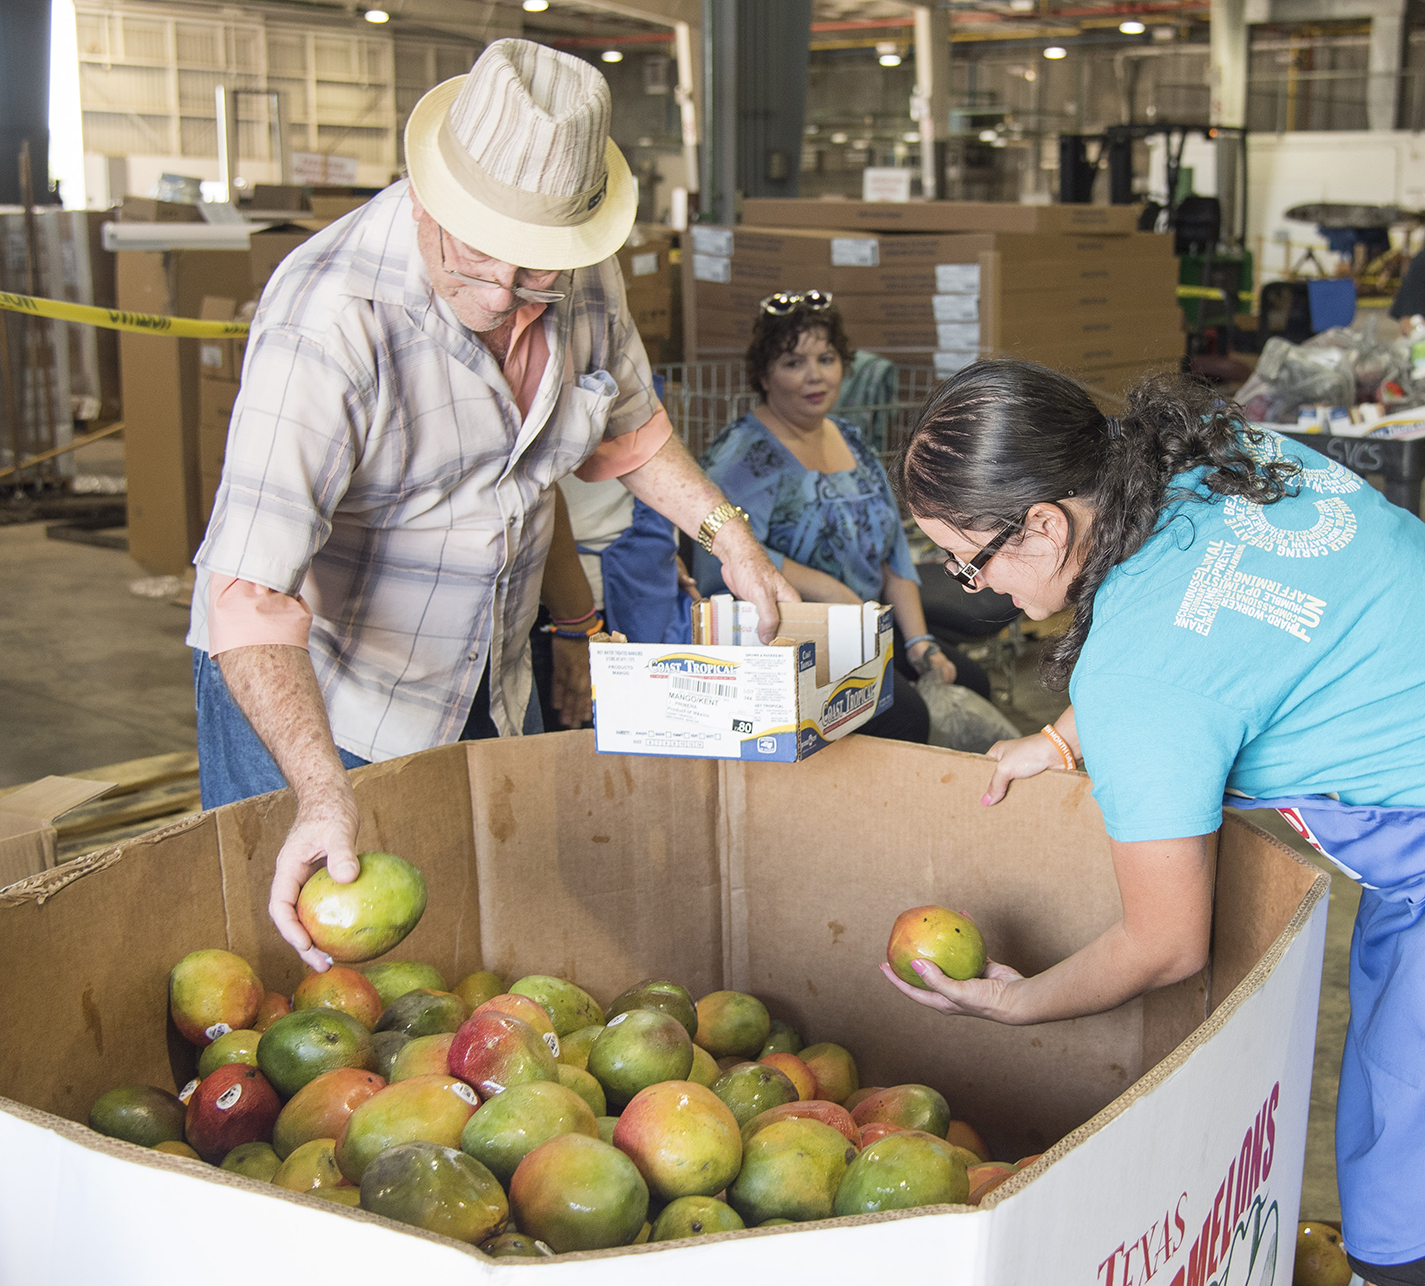 Banny Jaen from the NW CIE department sifts through a box of mangos with Inocente Salas, a Fort Worth resident, during NW Community Food Market Sept. 15 behind the NW collegiate high school.